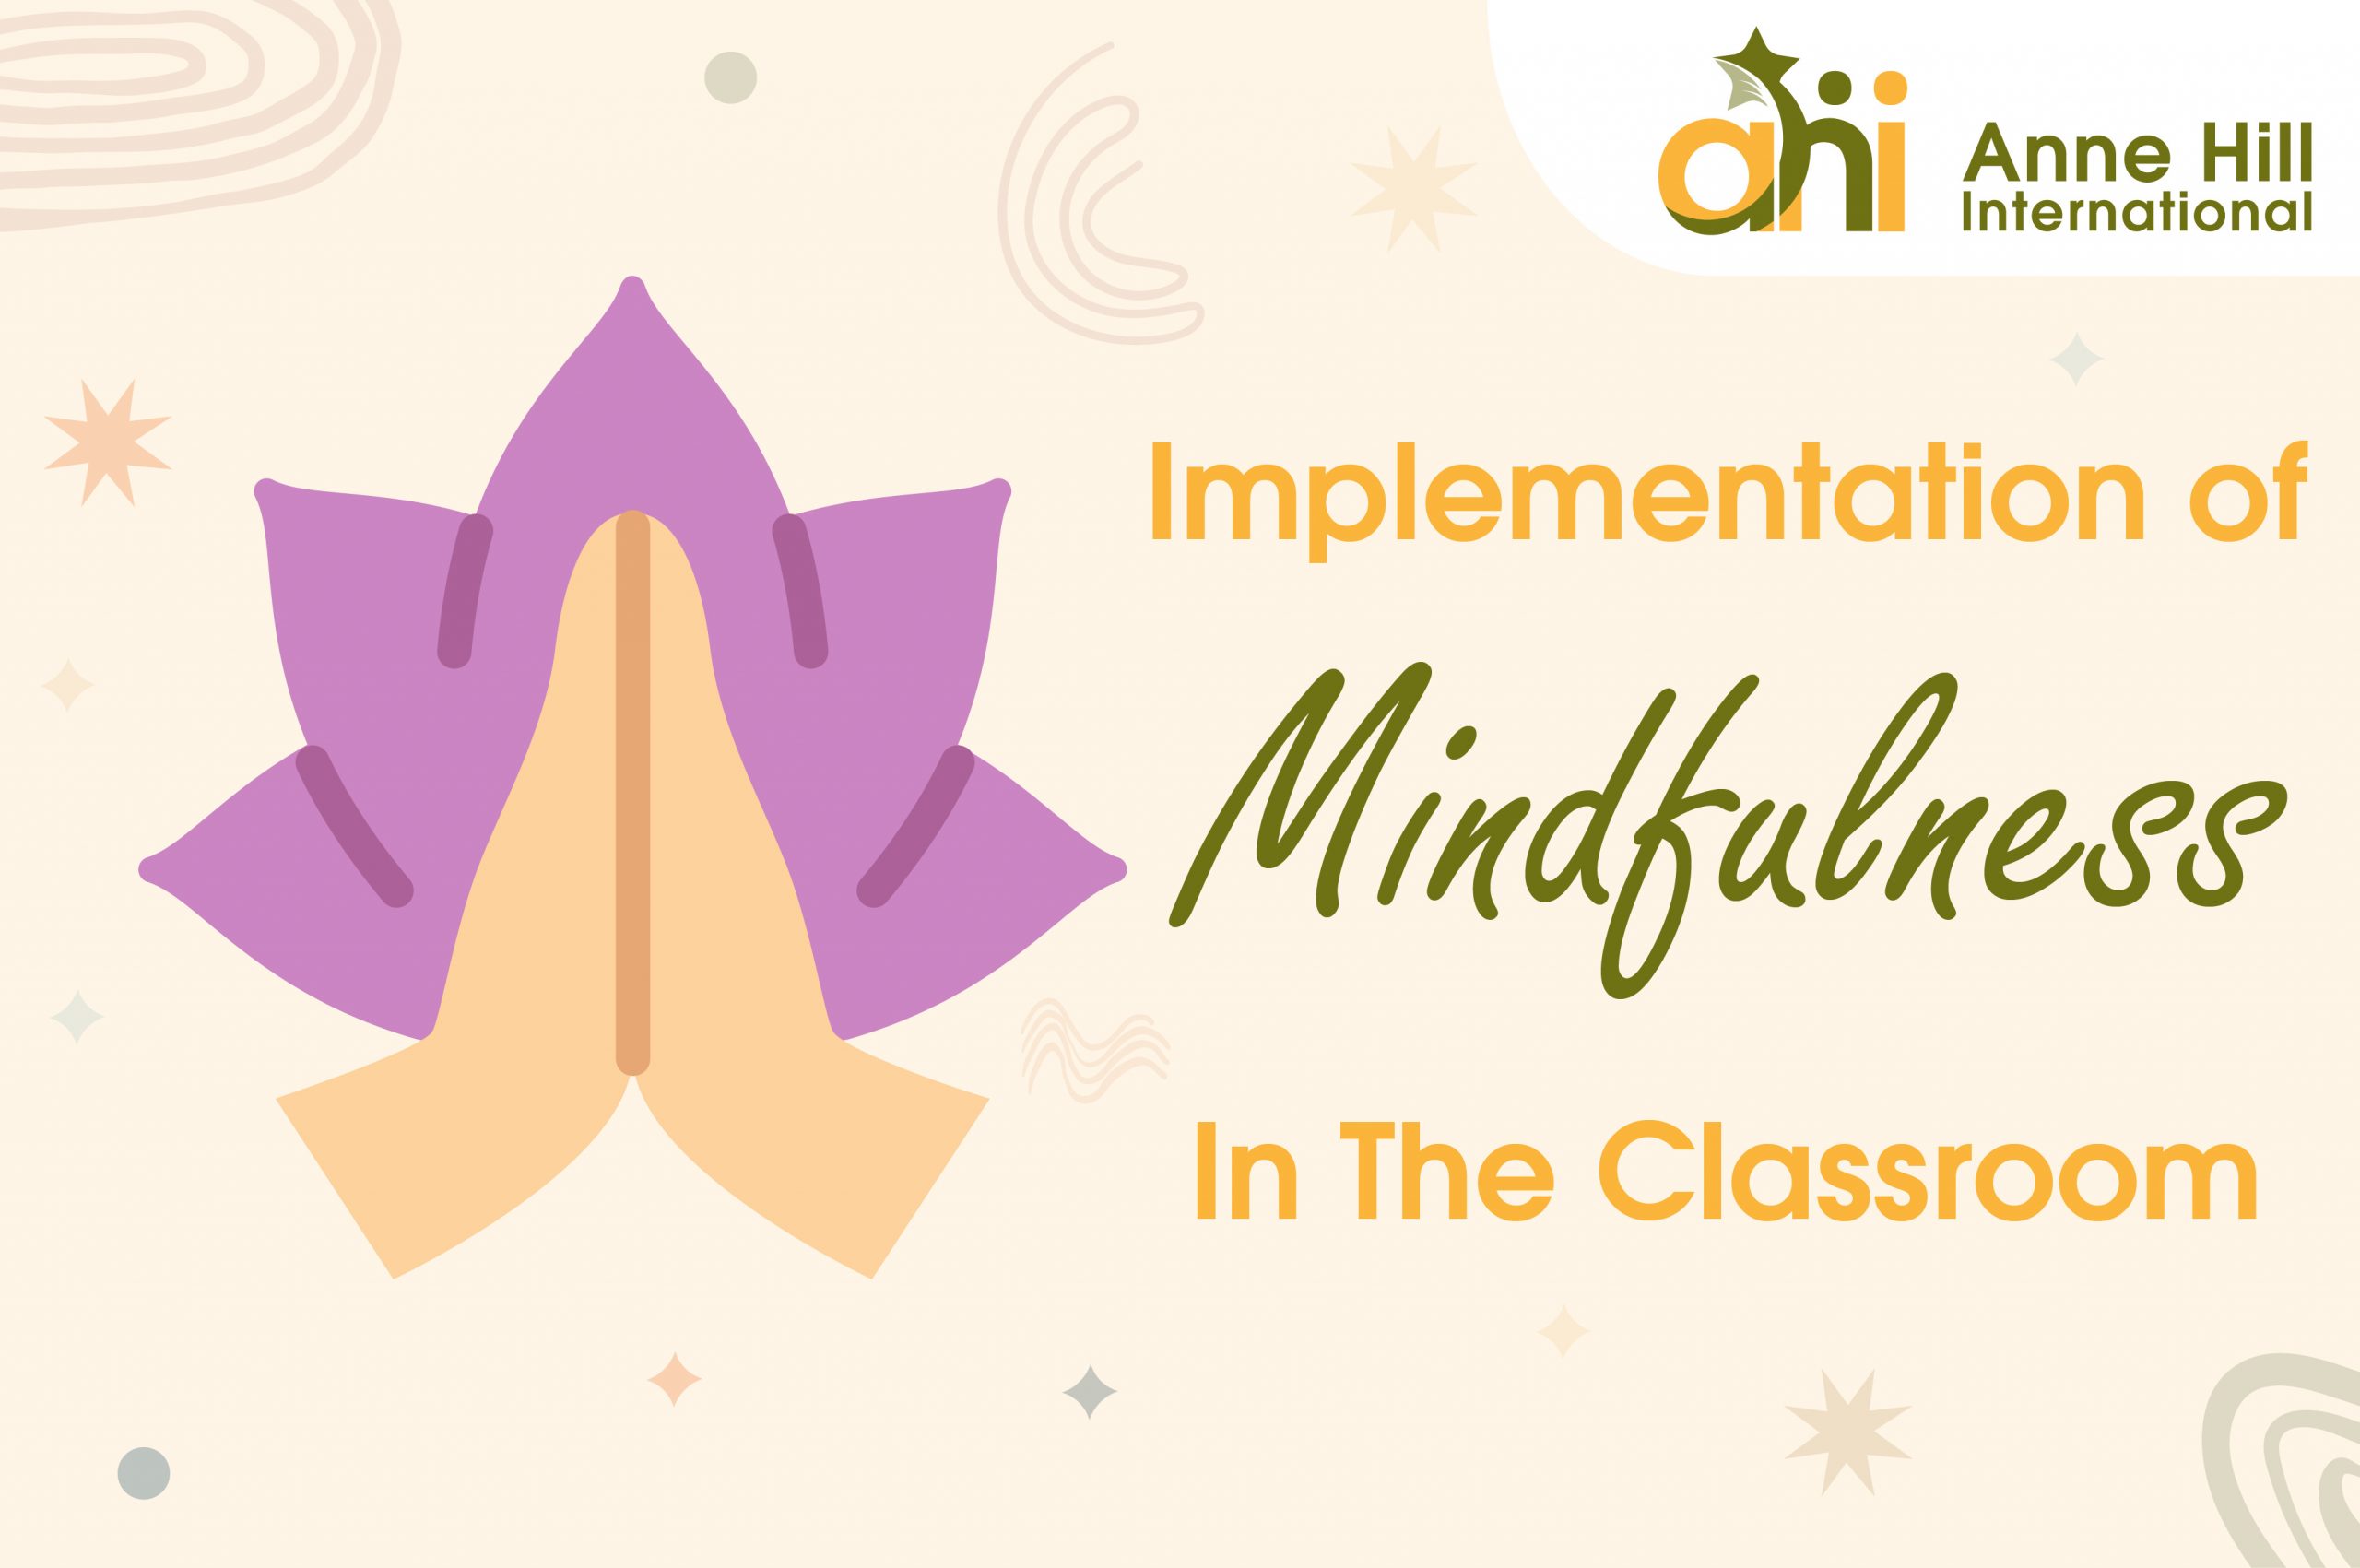 Implementation Of Mindfulness In AHI’s Classroom